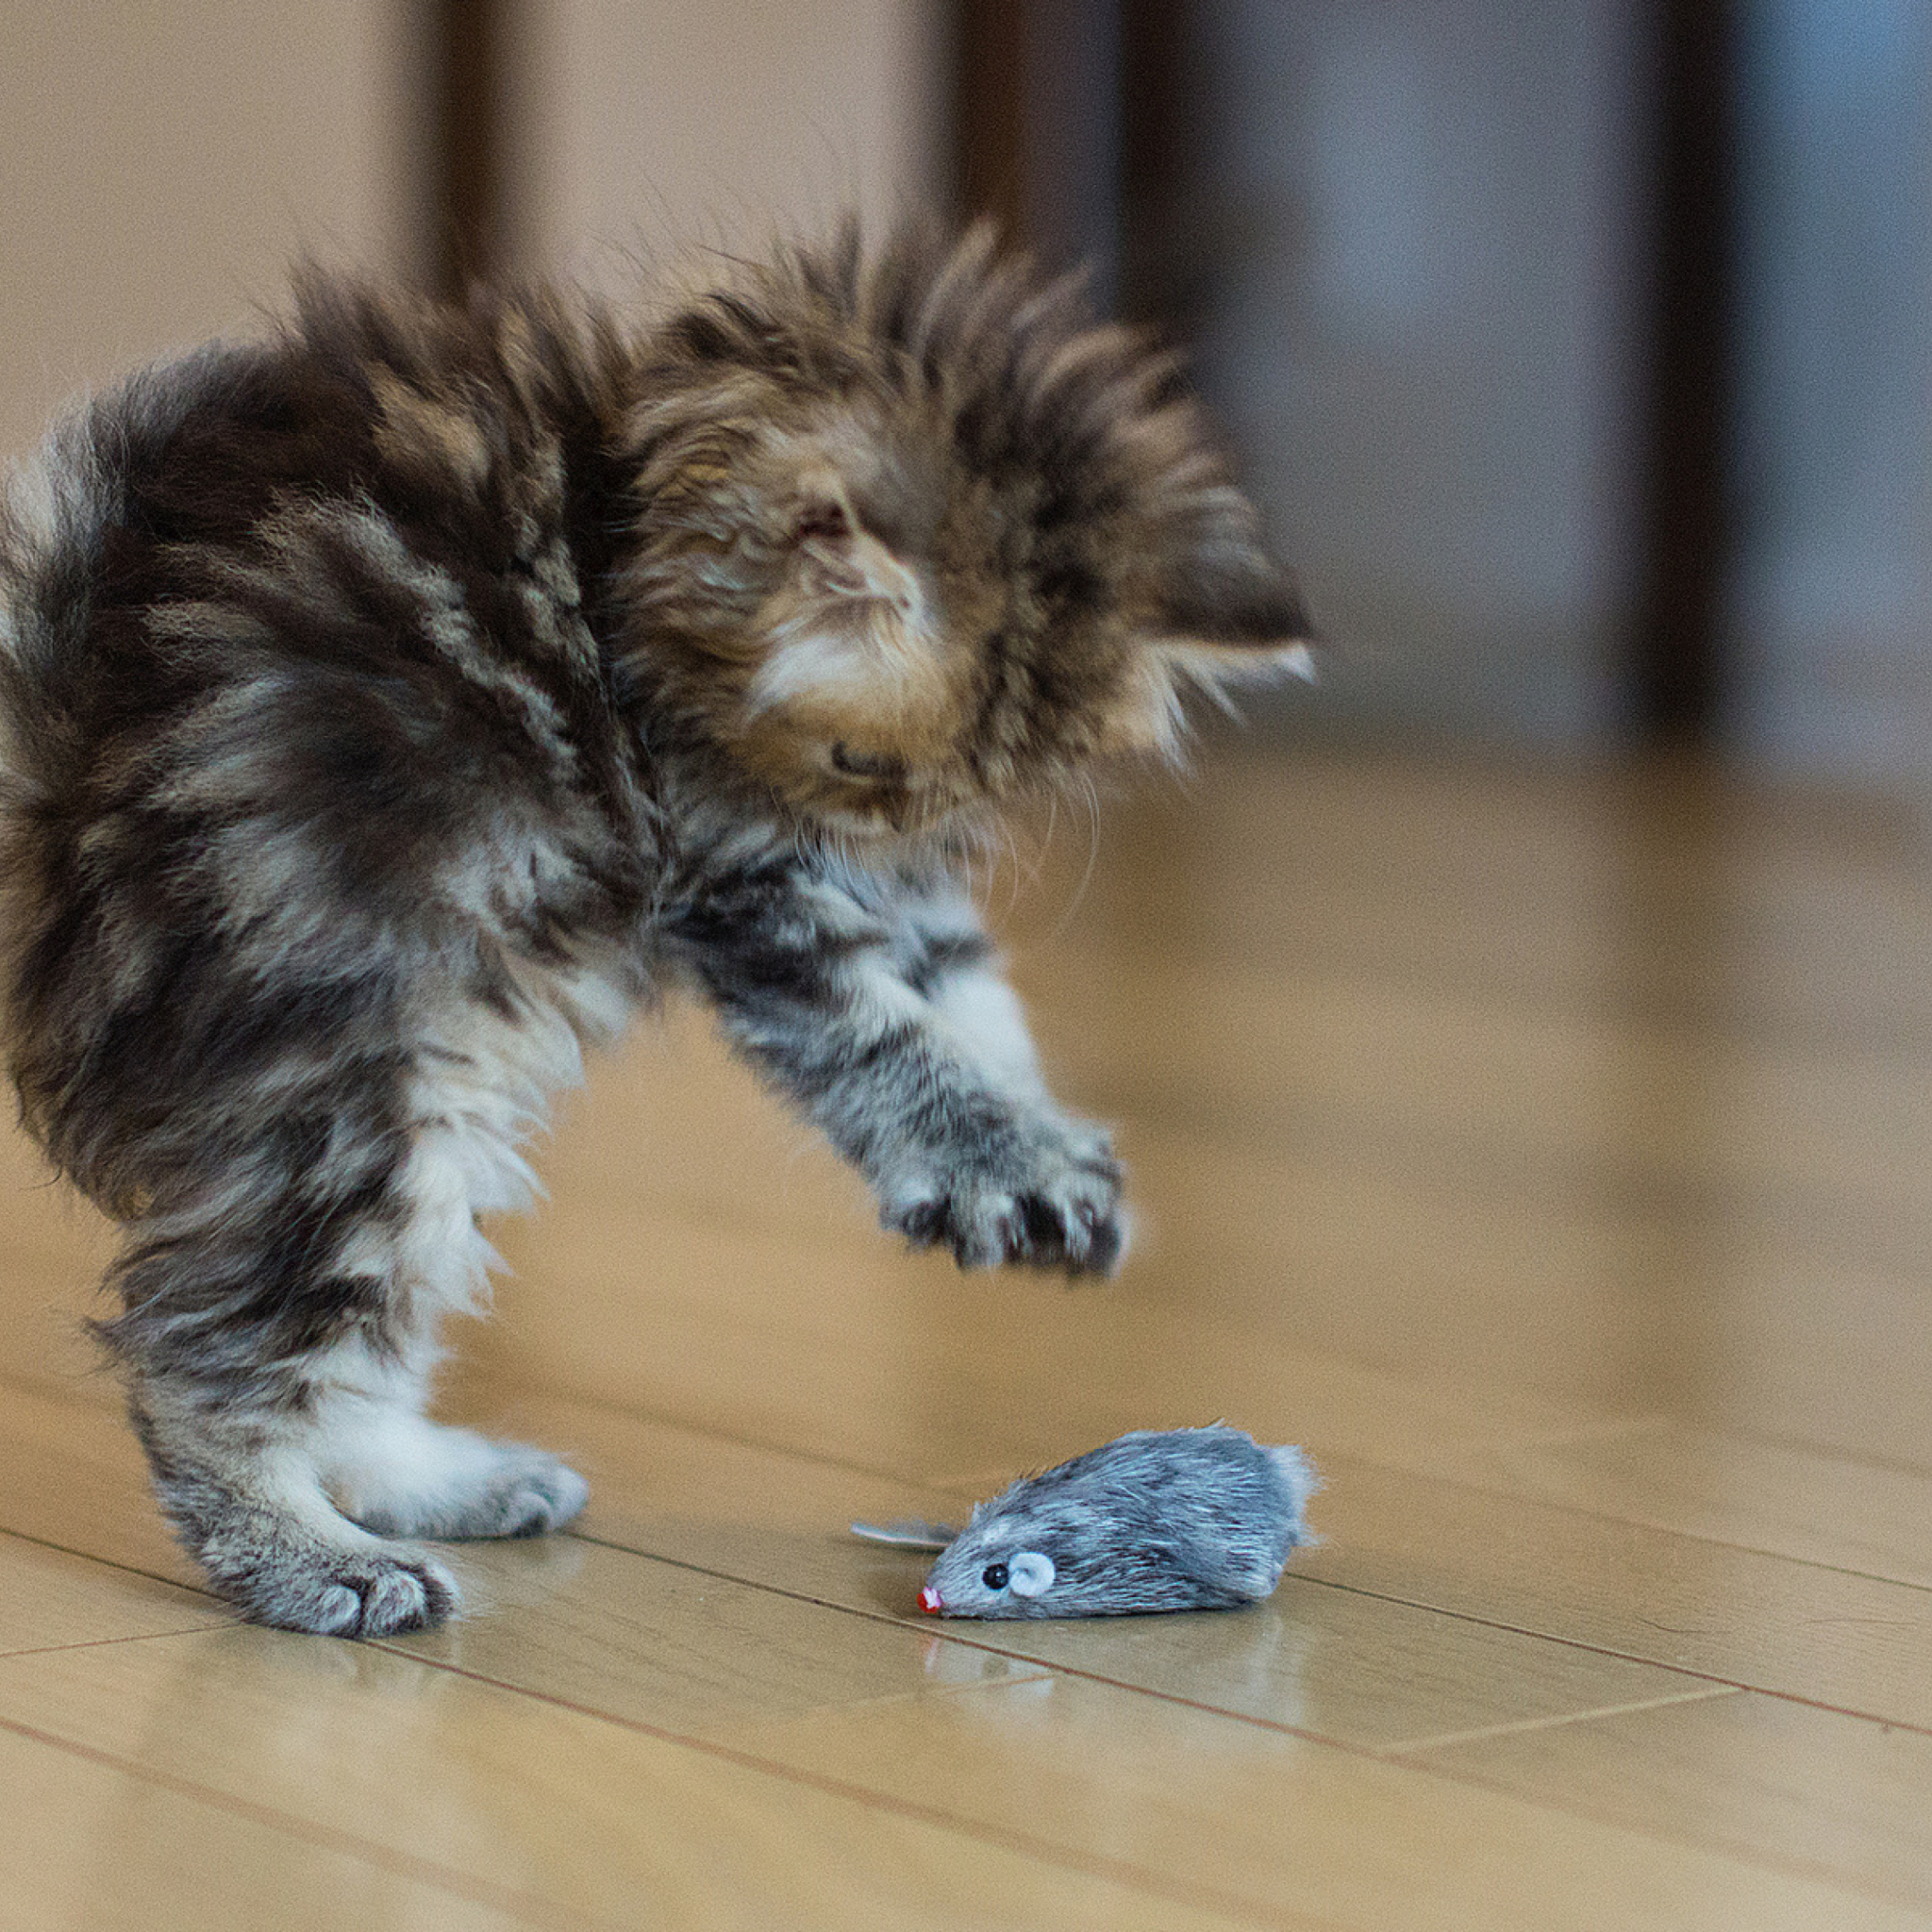 Funny Kitten Playing With Toy Mouse wallpaper 2048x2048